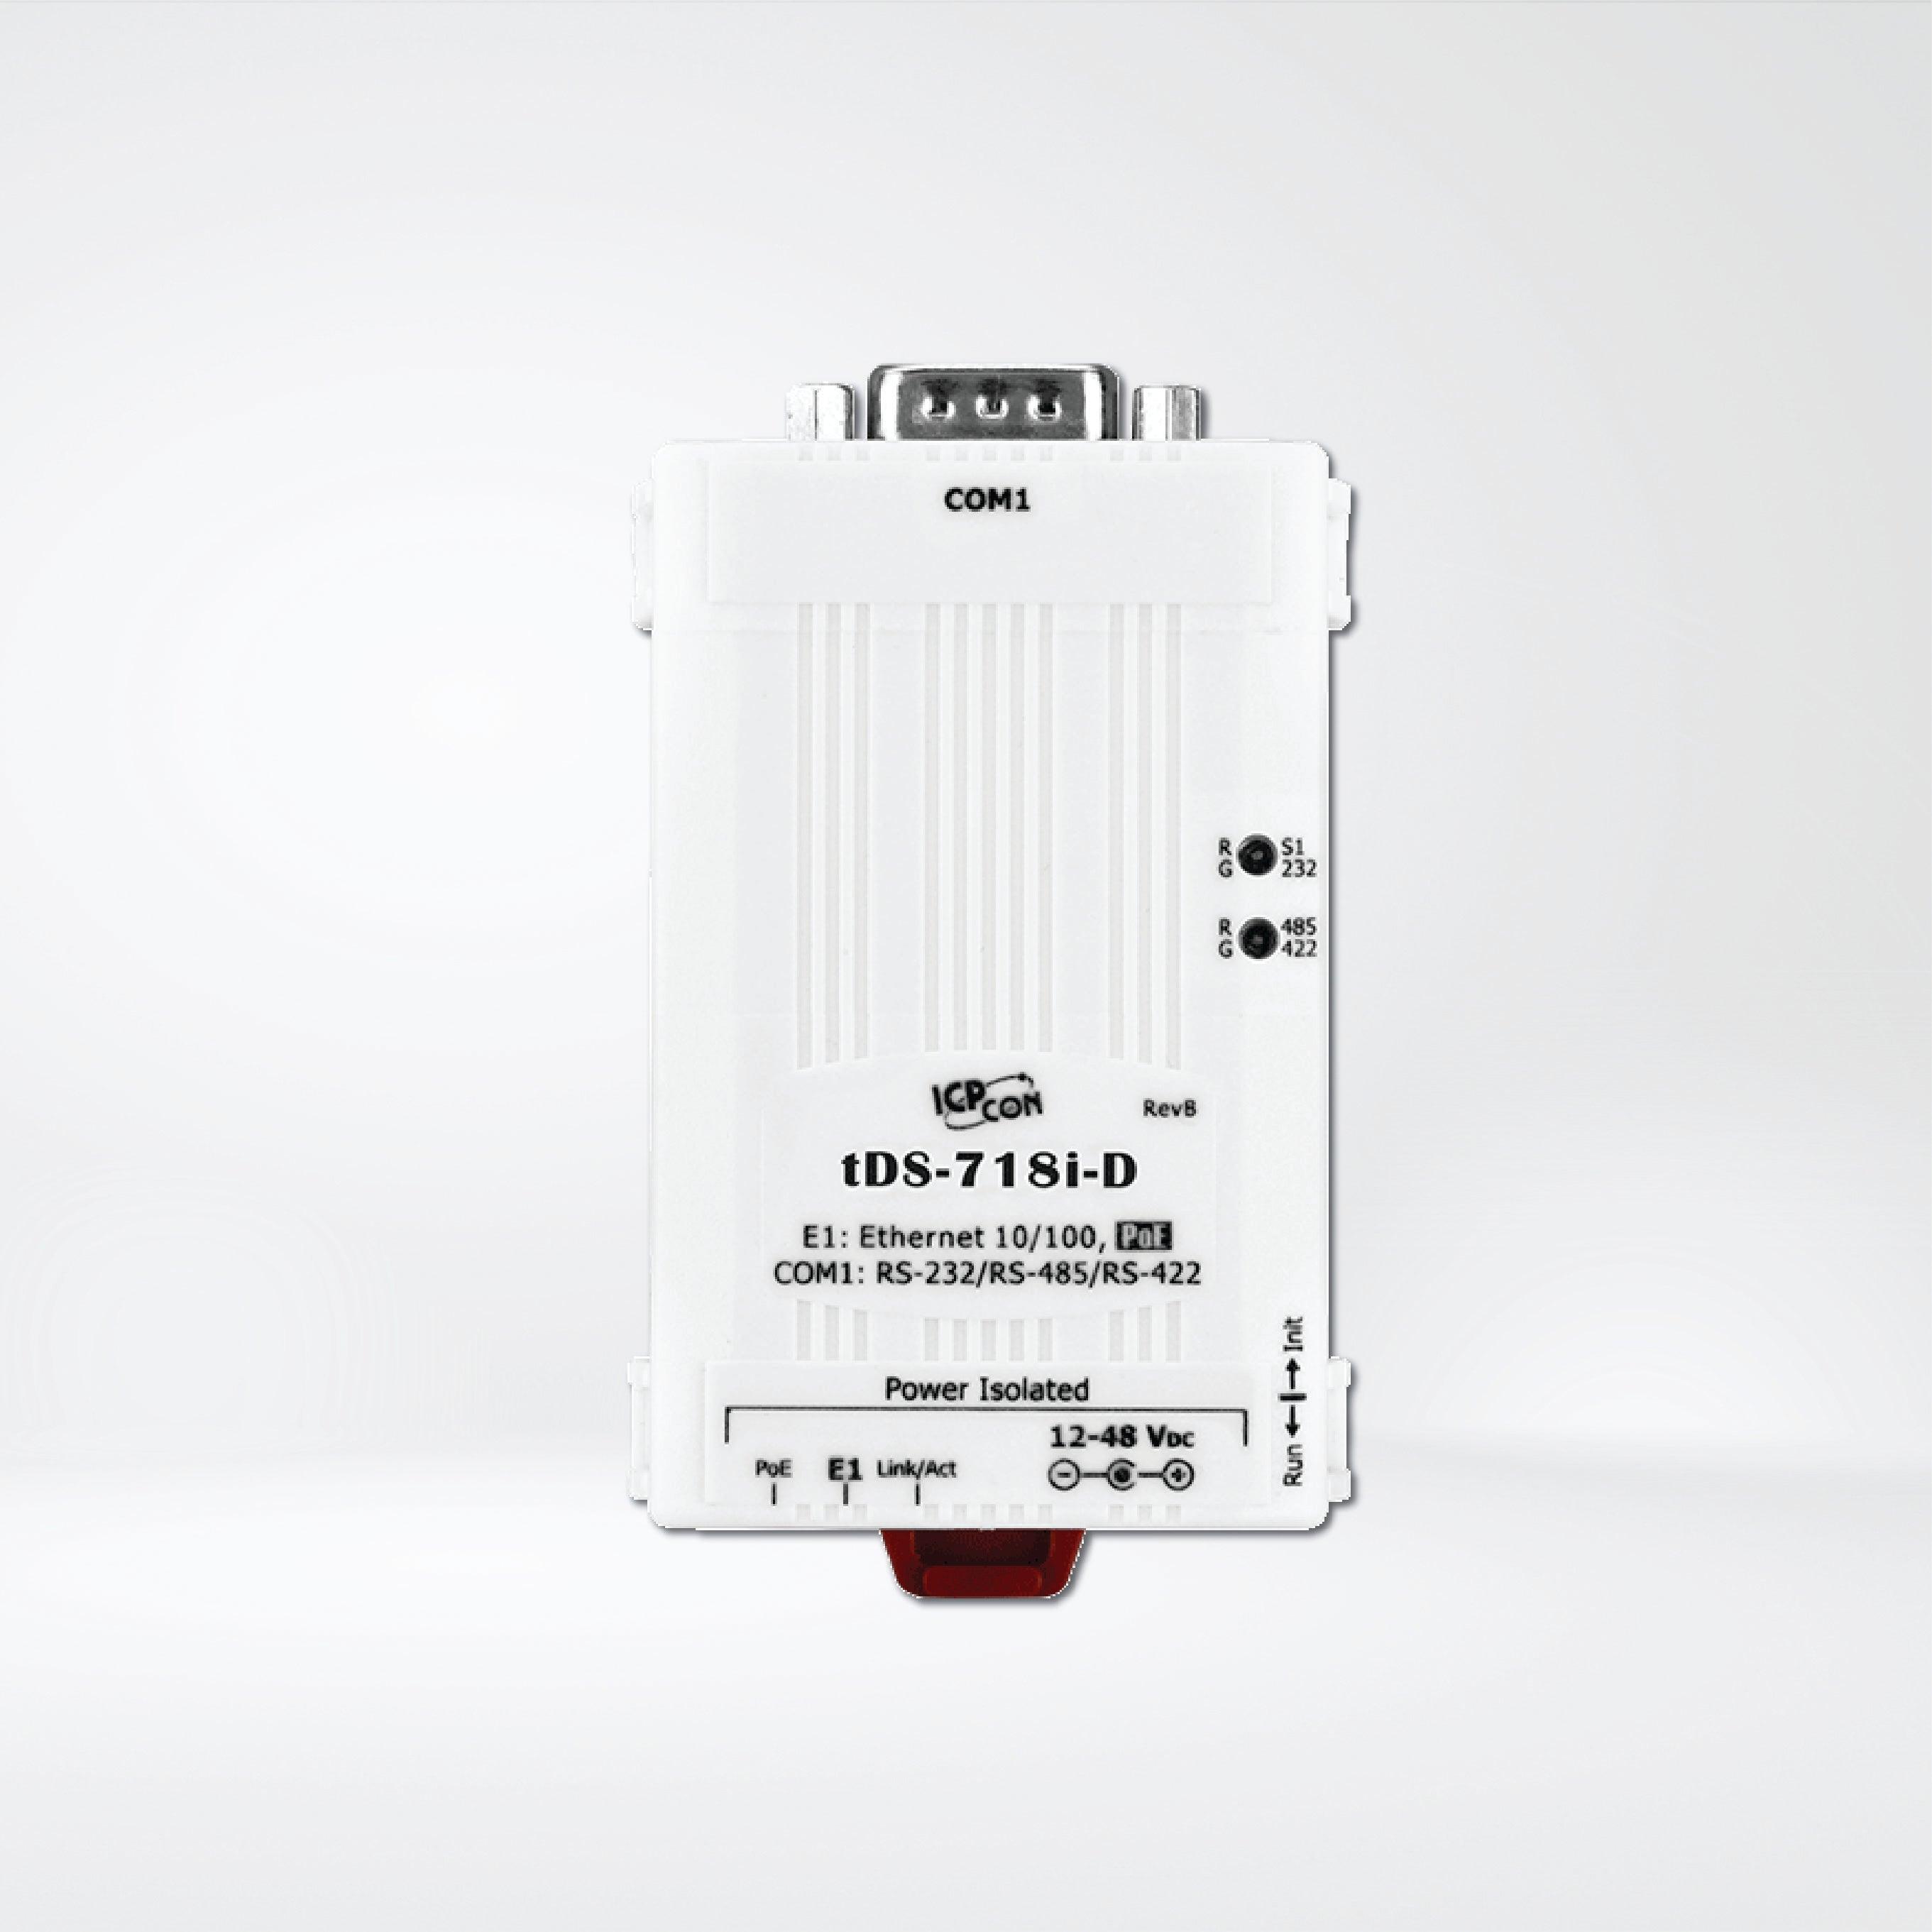 tDS-718i-D CR Tiny (1x RS-232/422/485, DB-9 Male) Serial-to-Ethernet Device Server - Riverplus